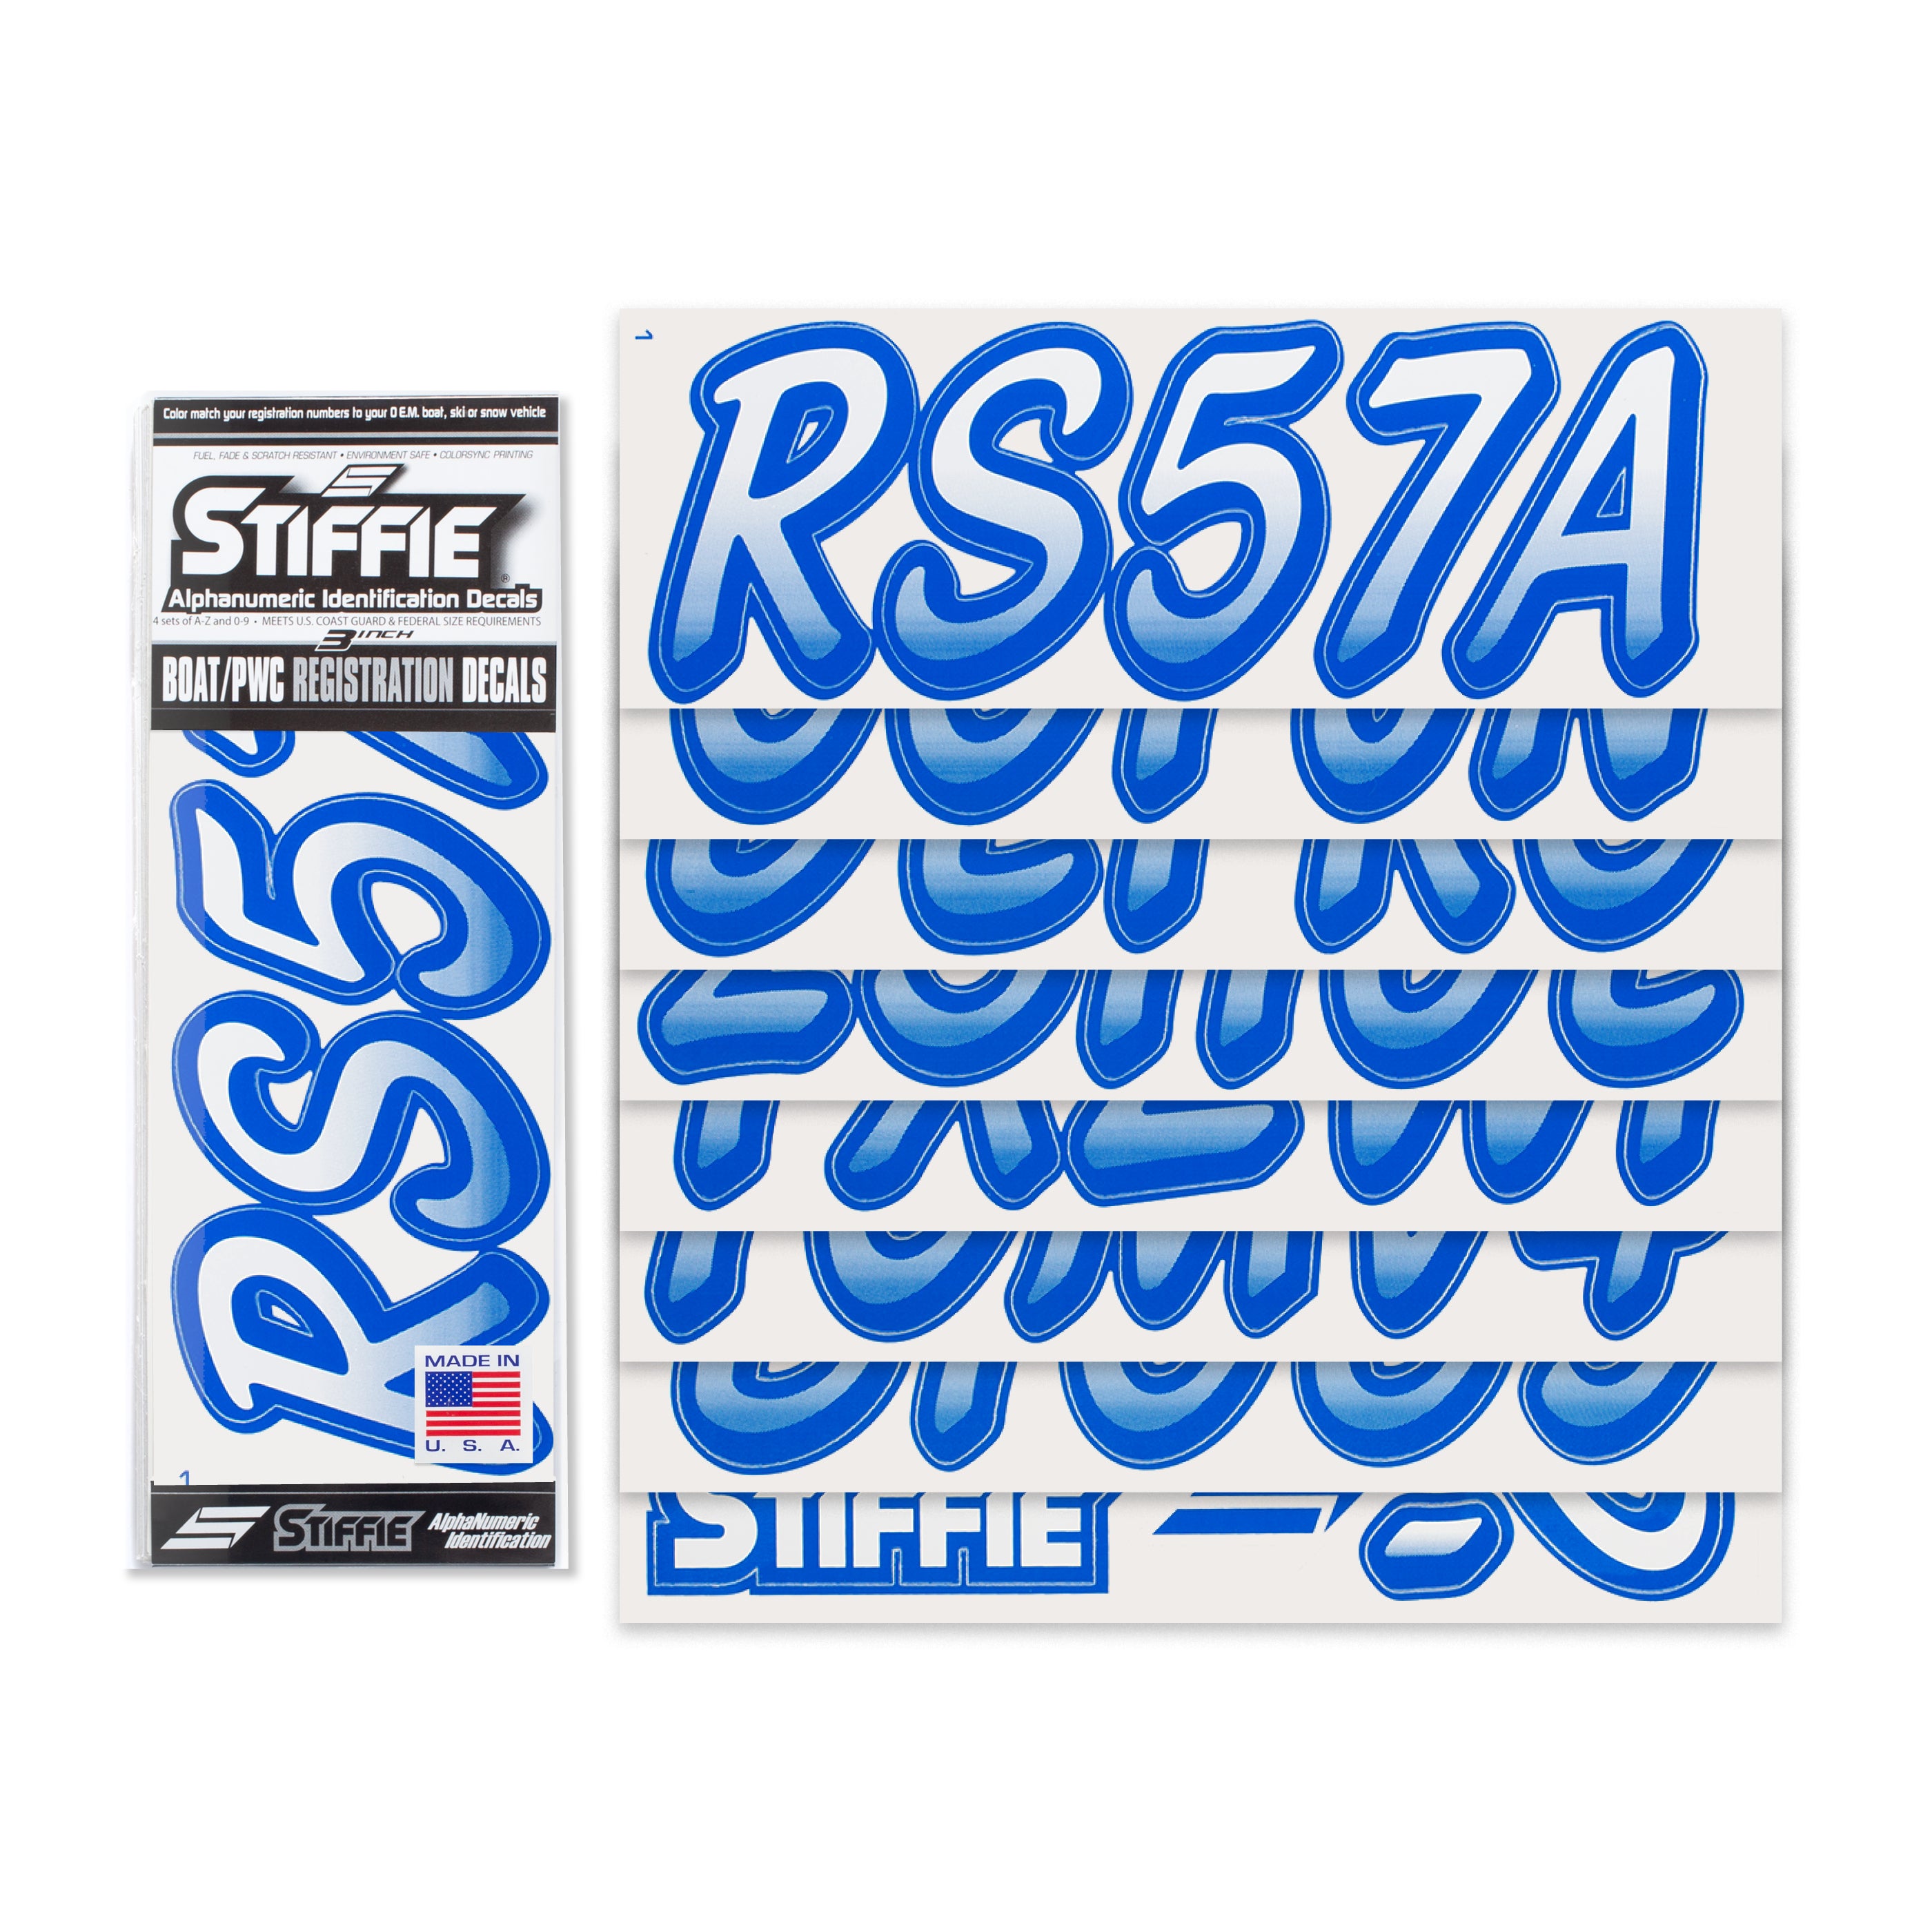 STIFFIE Whipline White/Blue 3" Alpha-Numeric Registration Identification Numbers Stickers Decals for Boats & Personal Watercraft